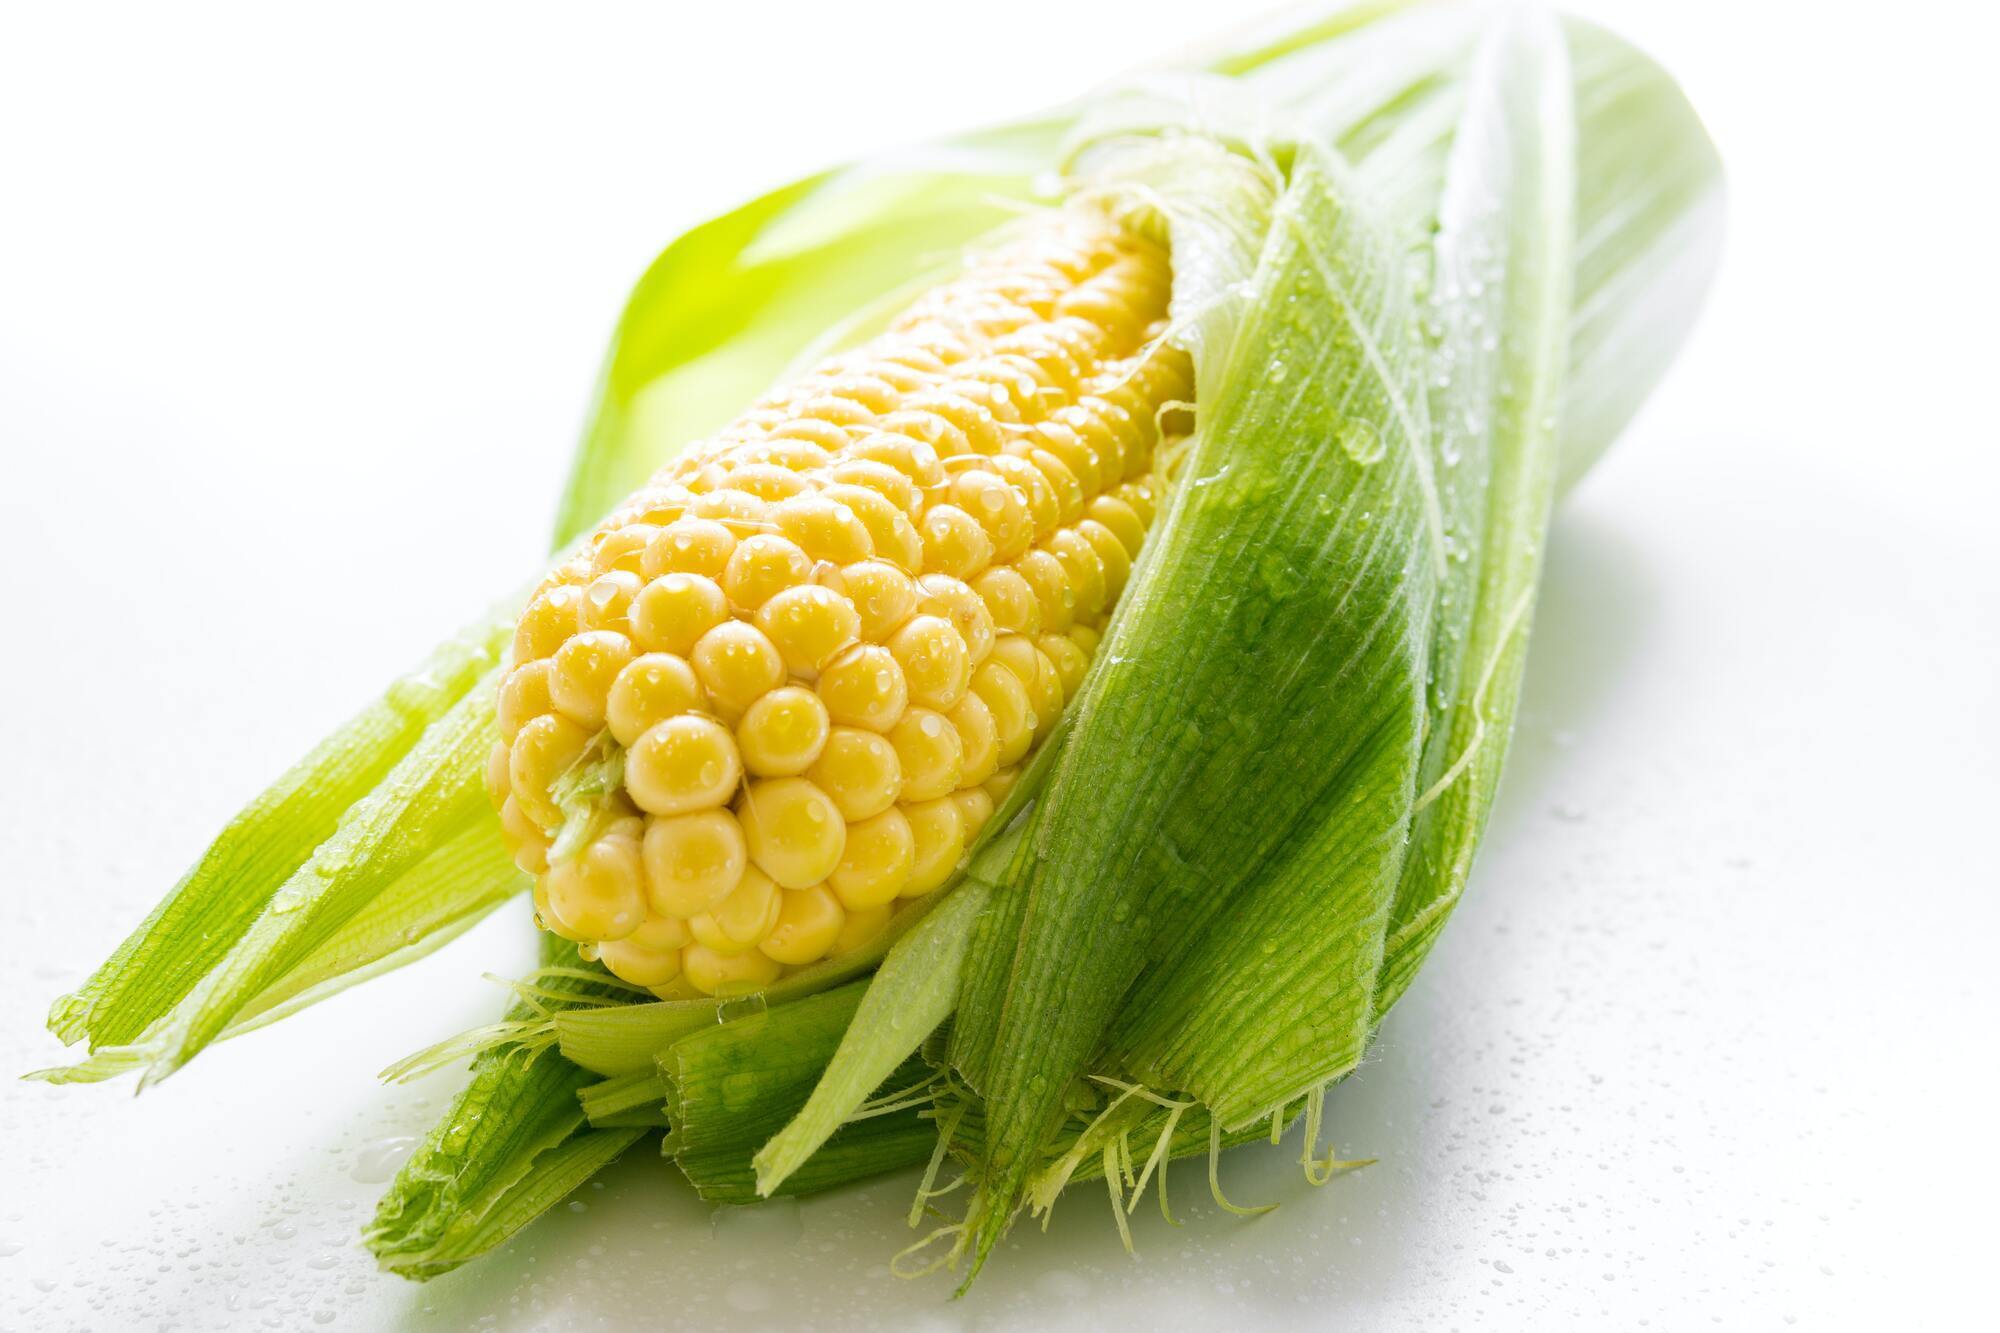 Corn for the dish